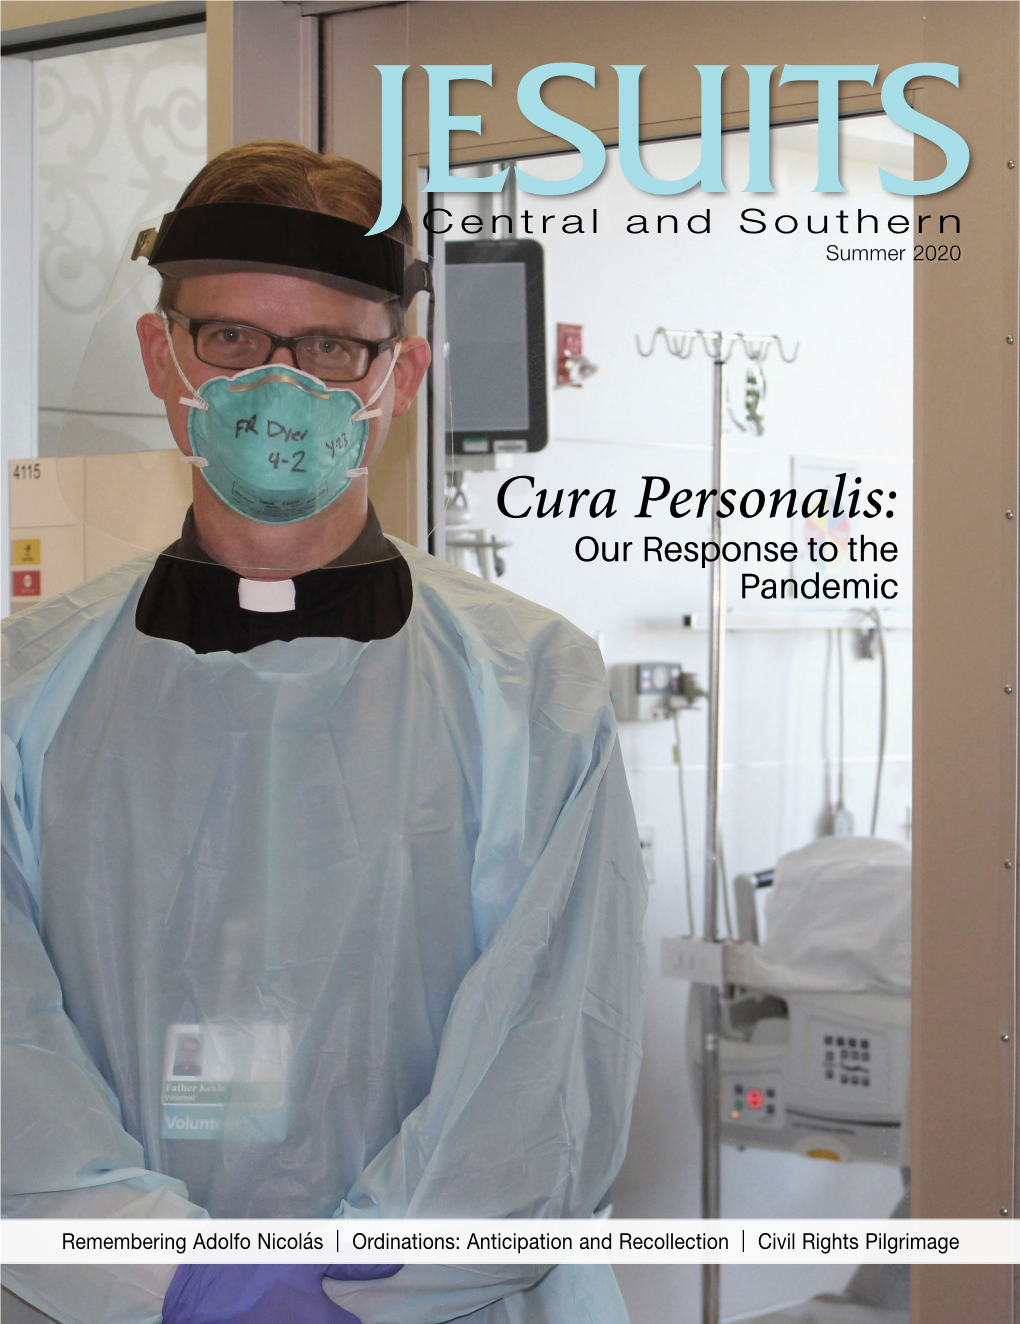 Cura Personalis: Our Response to the Pandemic